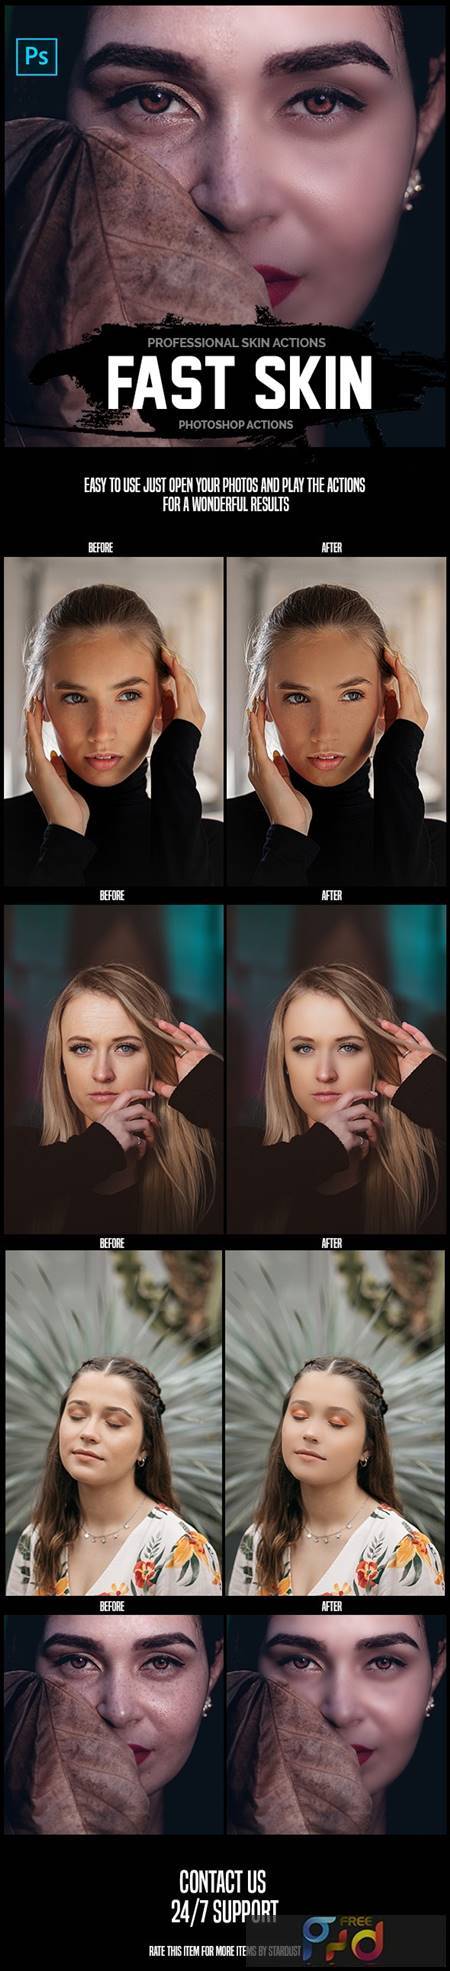 Fast Skin - Professional Photoshop Actions 26154963 1